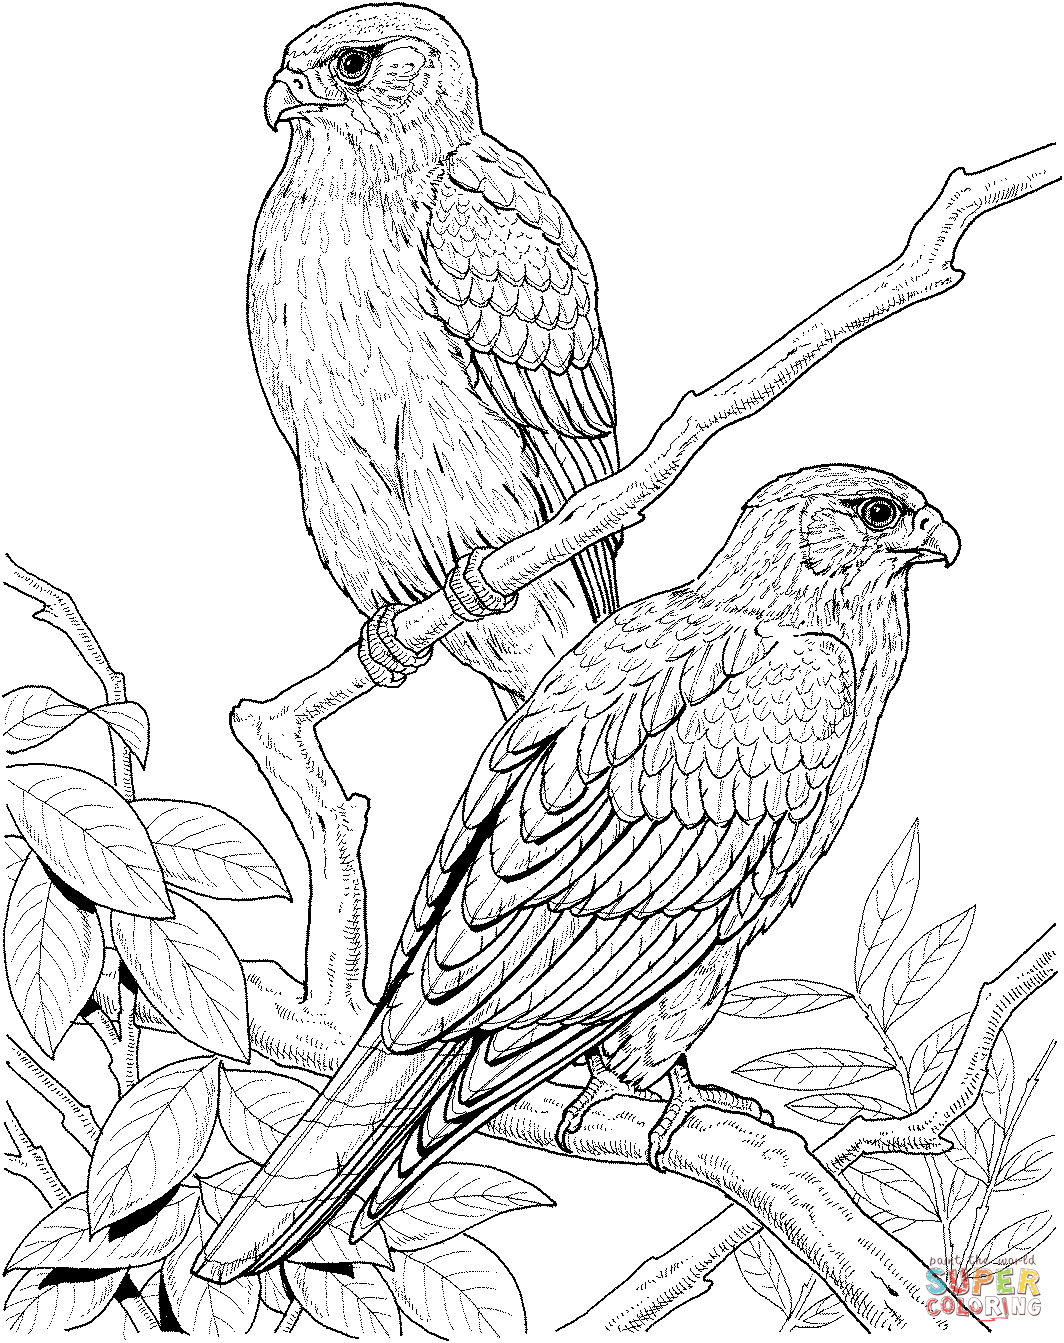 Falcon coloring #5, Download drawings